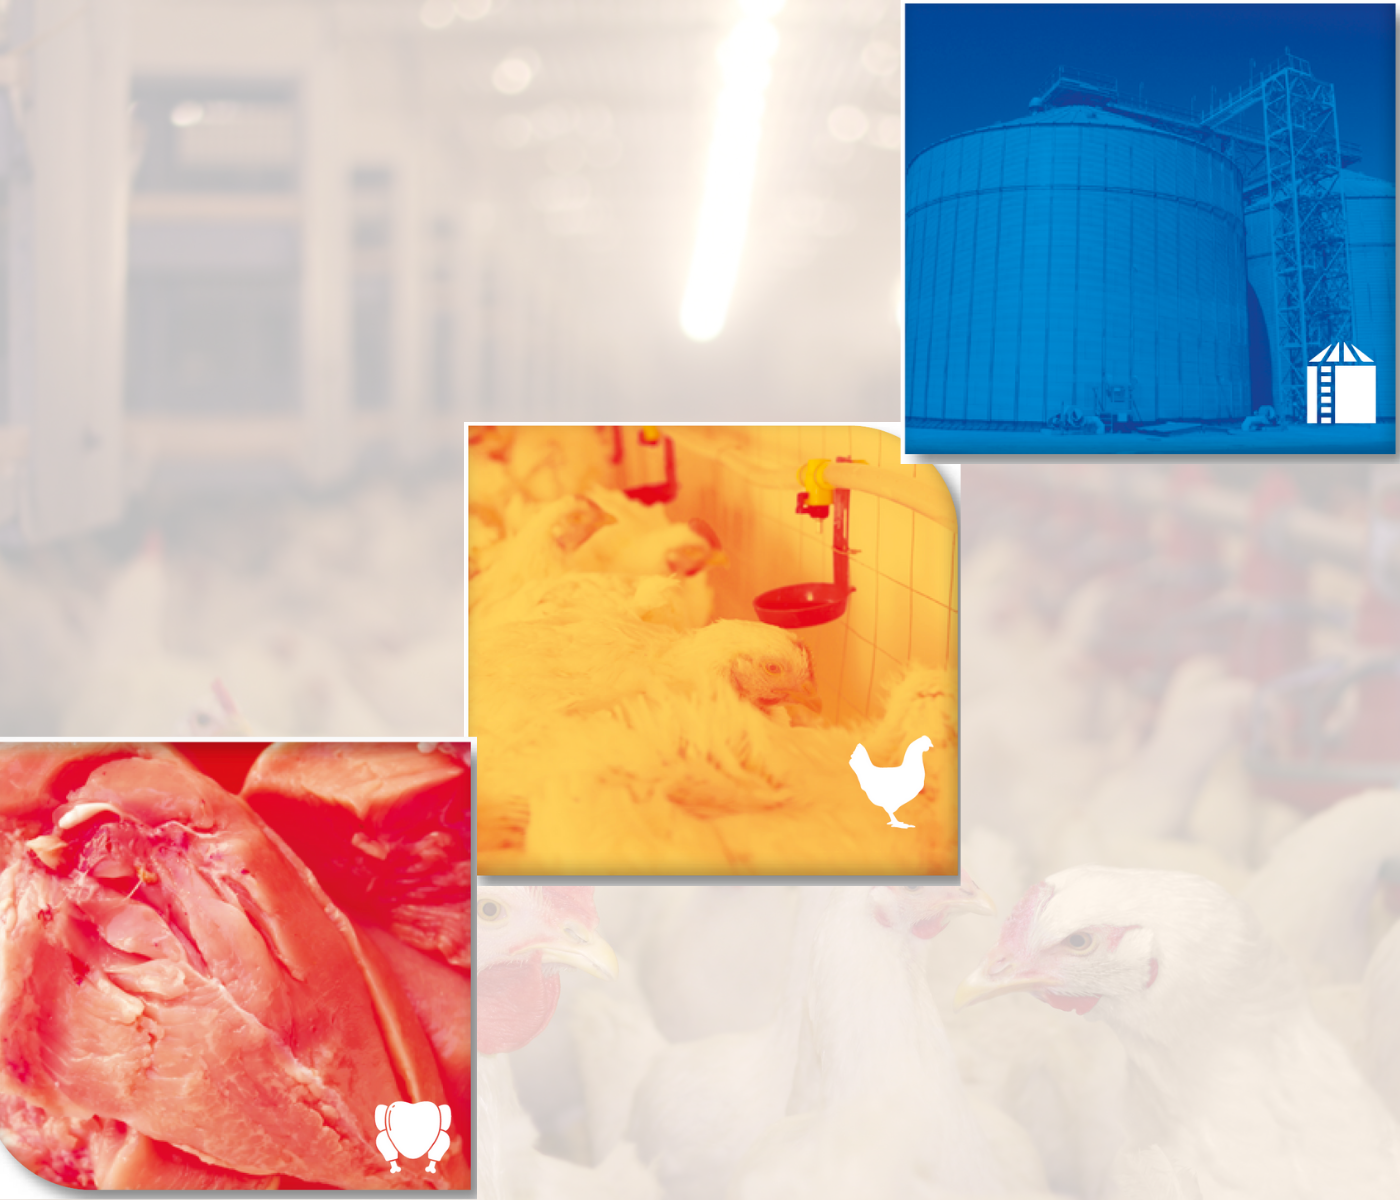 Learnings from the International Poultry Scientific Forum 2022